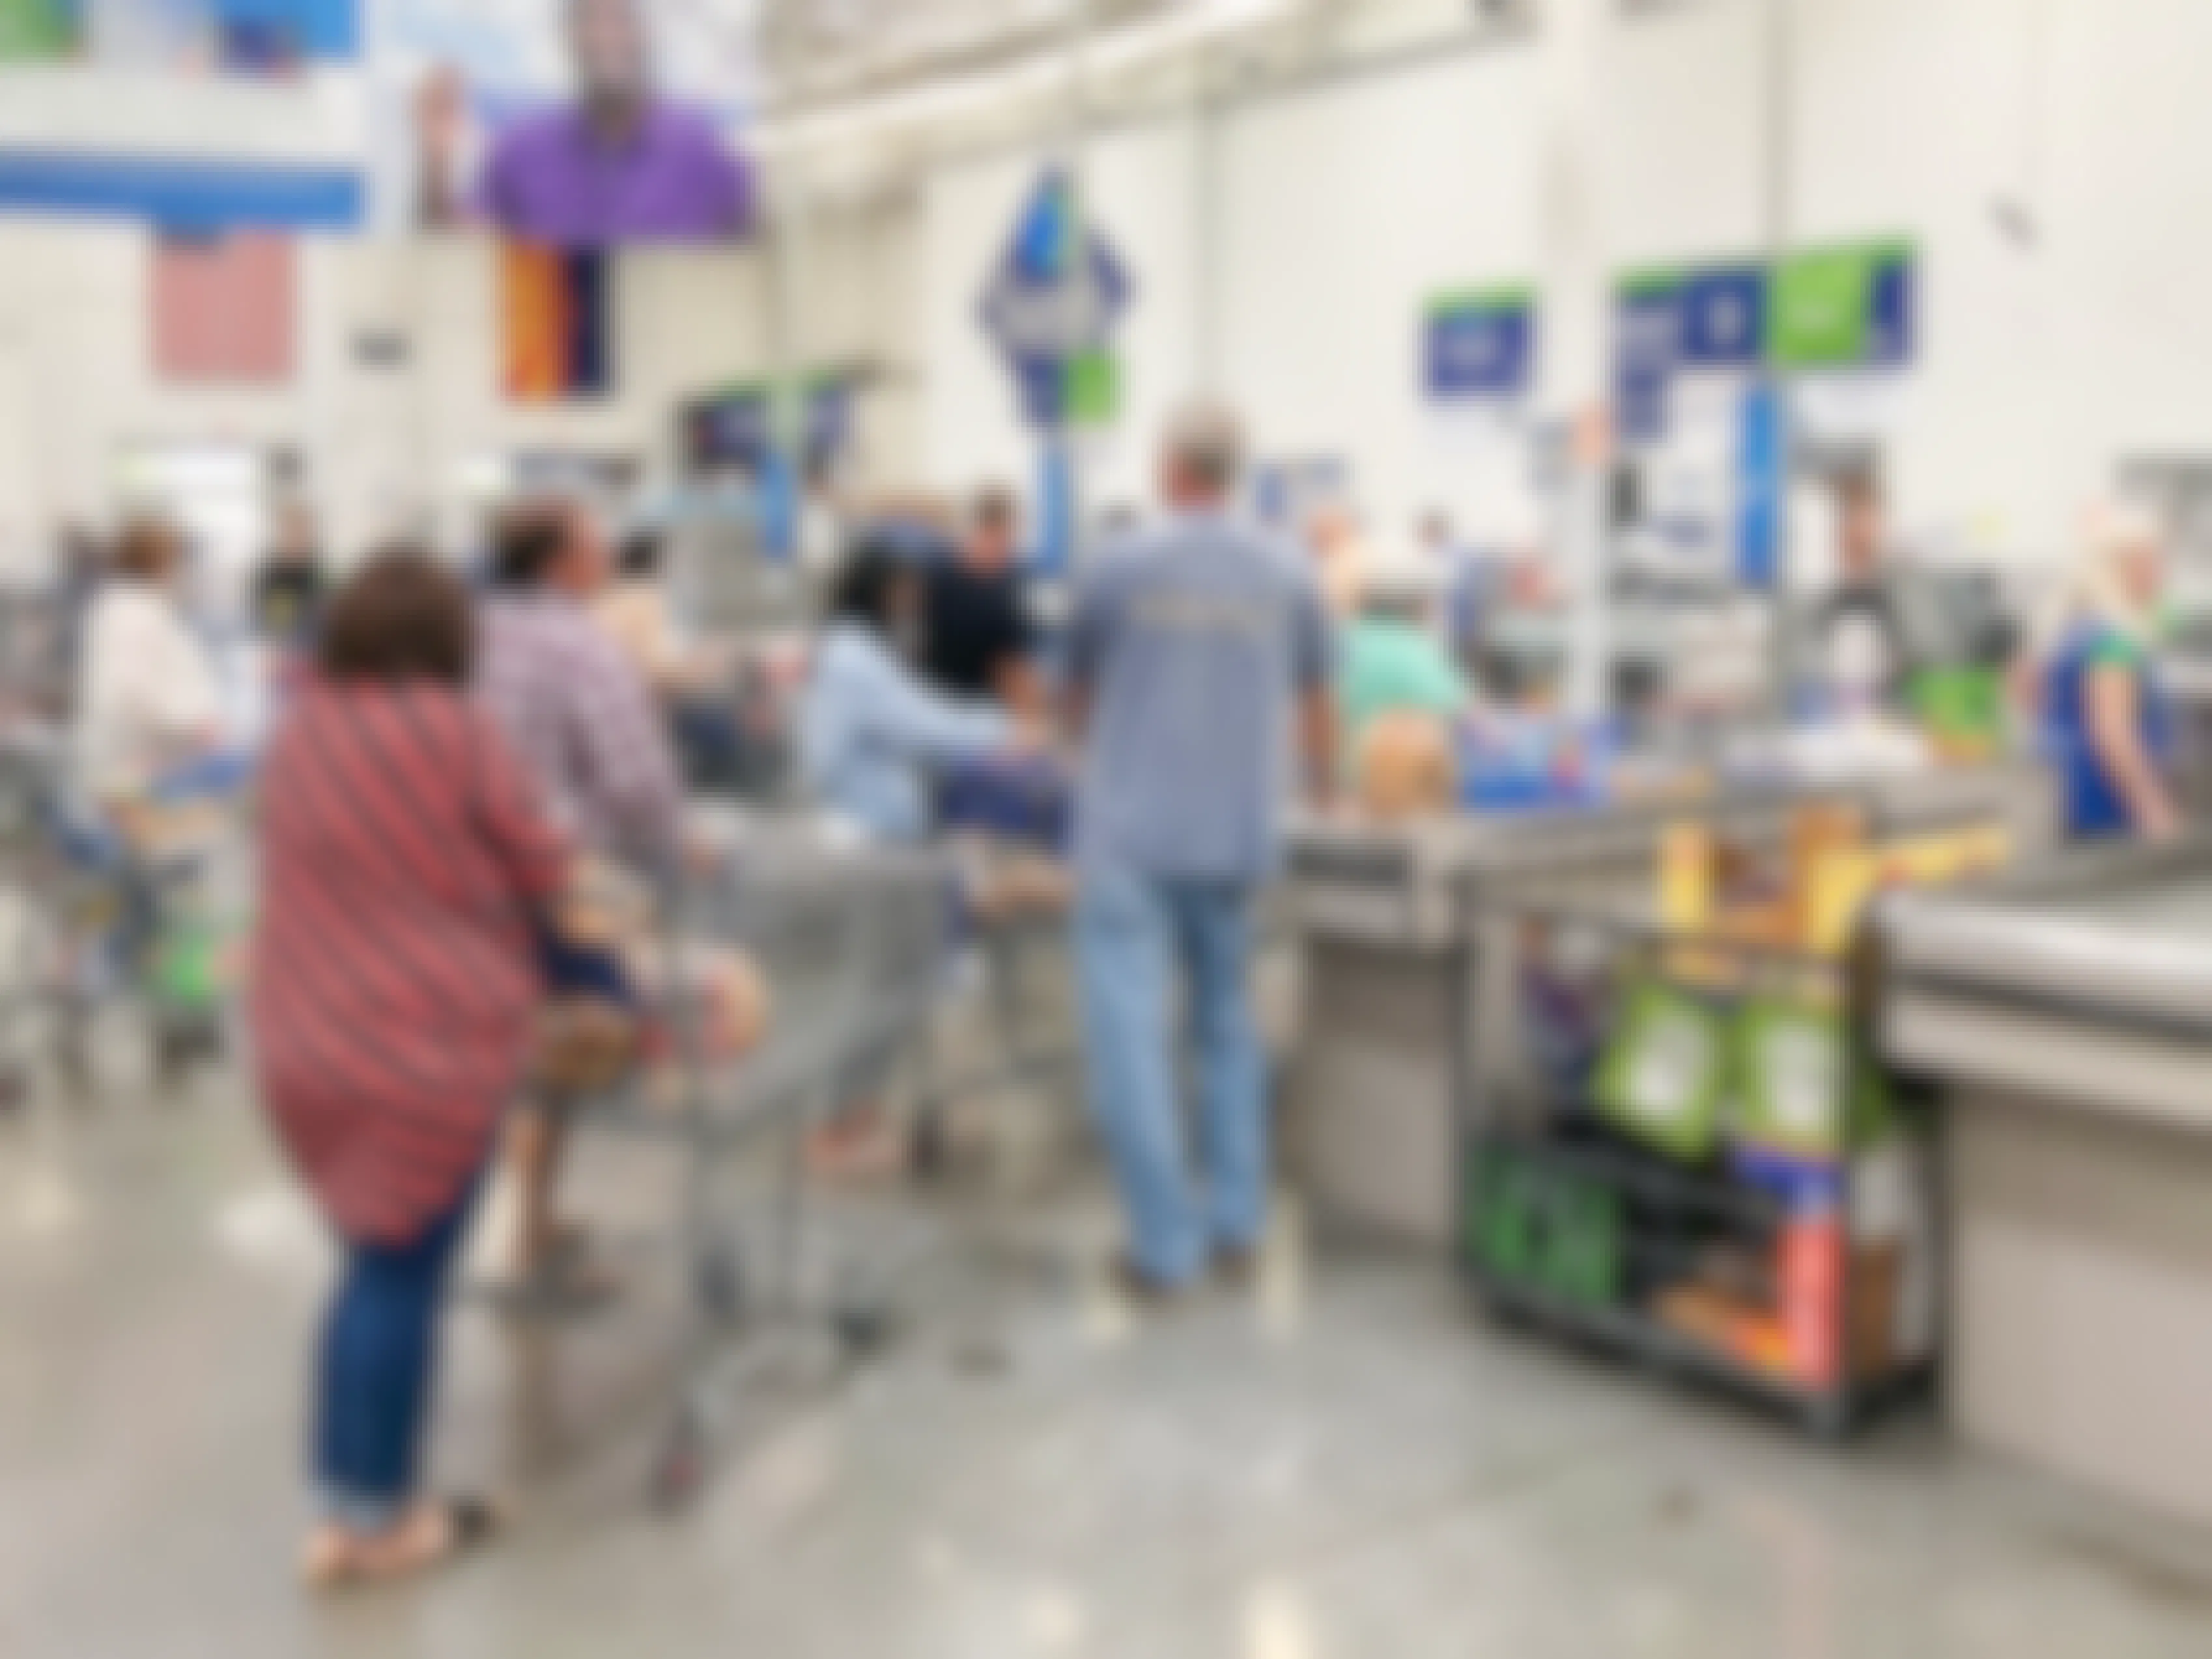 best things to buy at sam's club - Sam's Club members standing in line for checkout with carts full of groceries and other items.